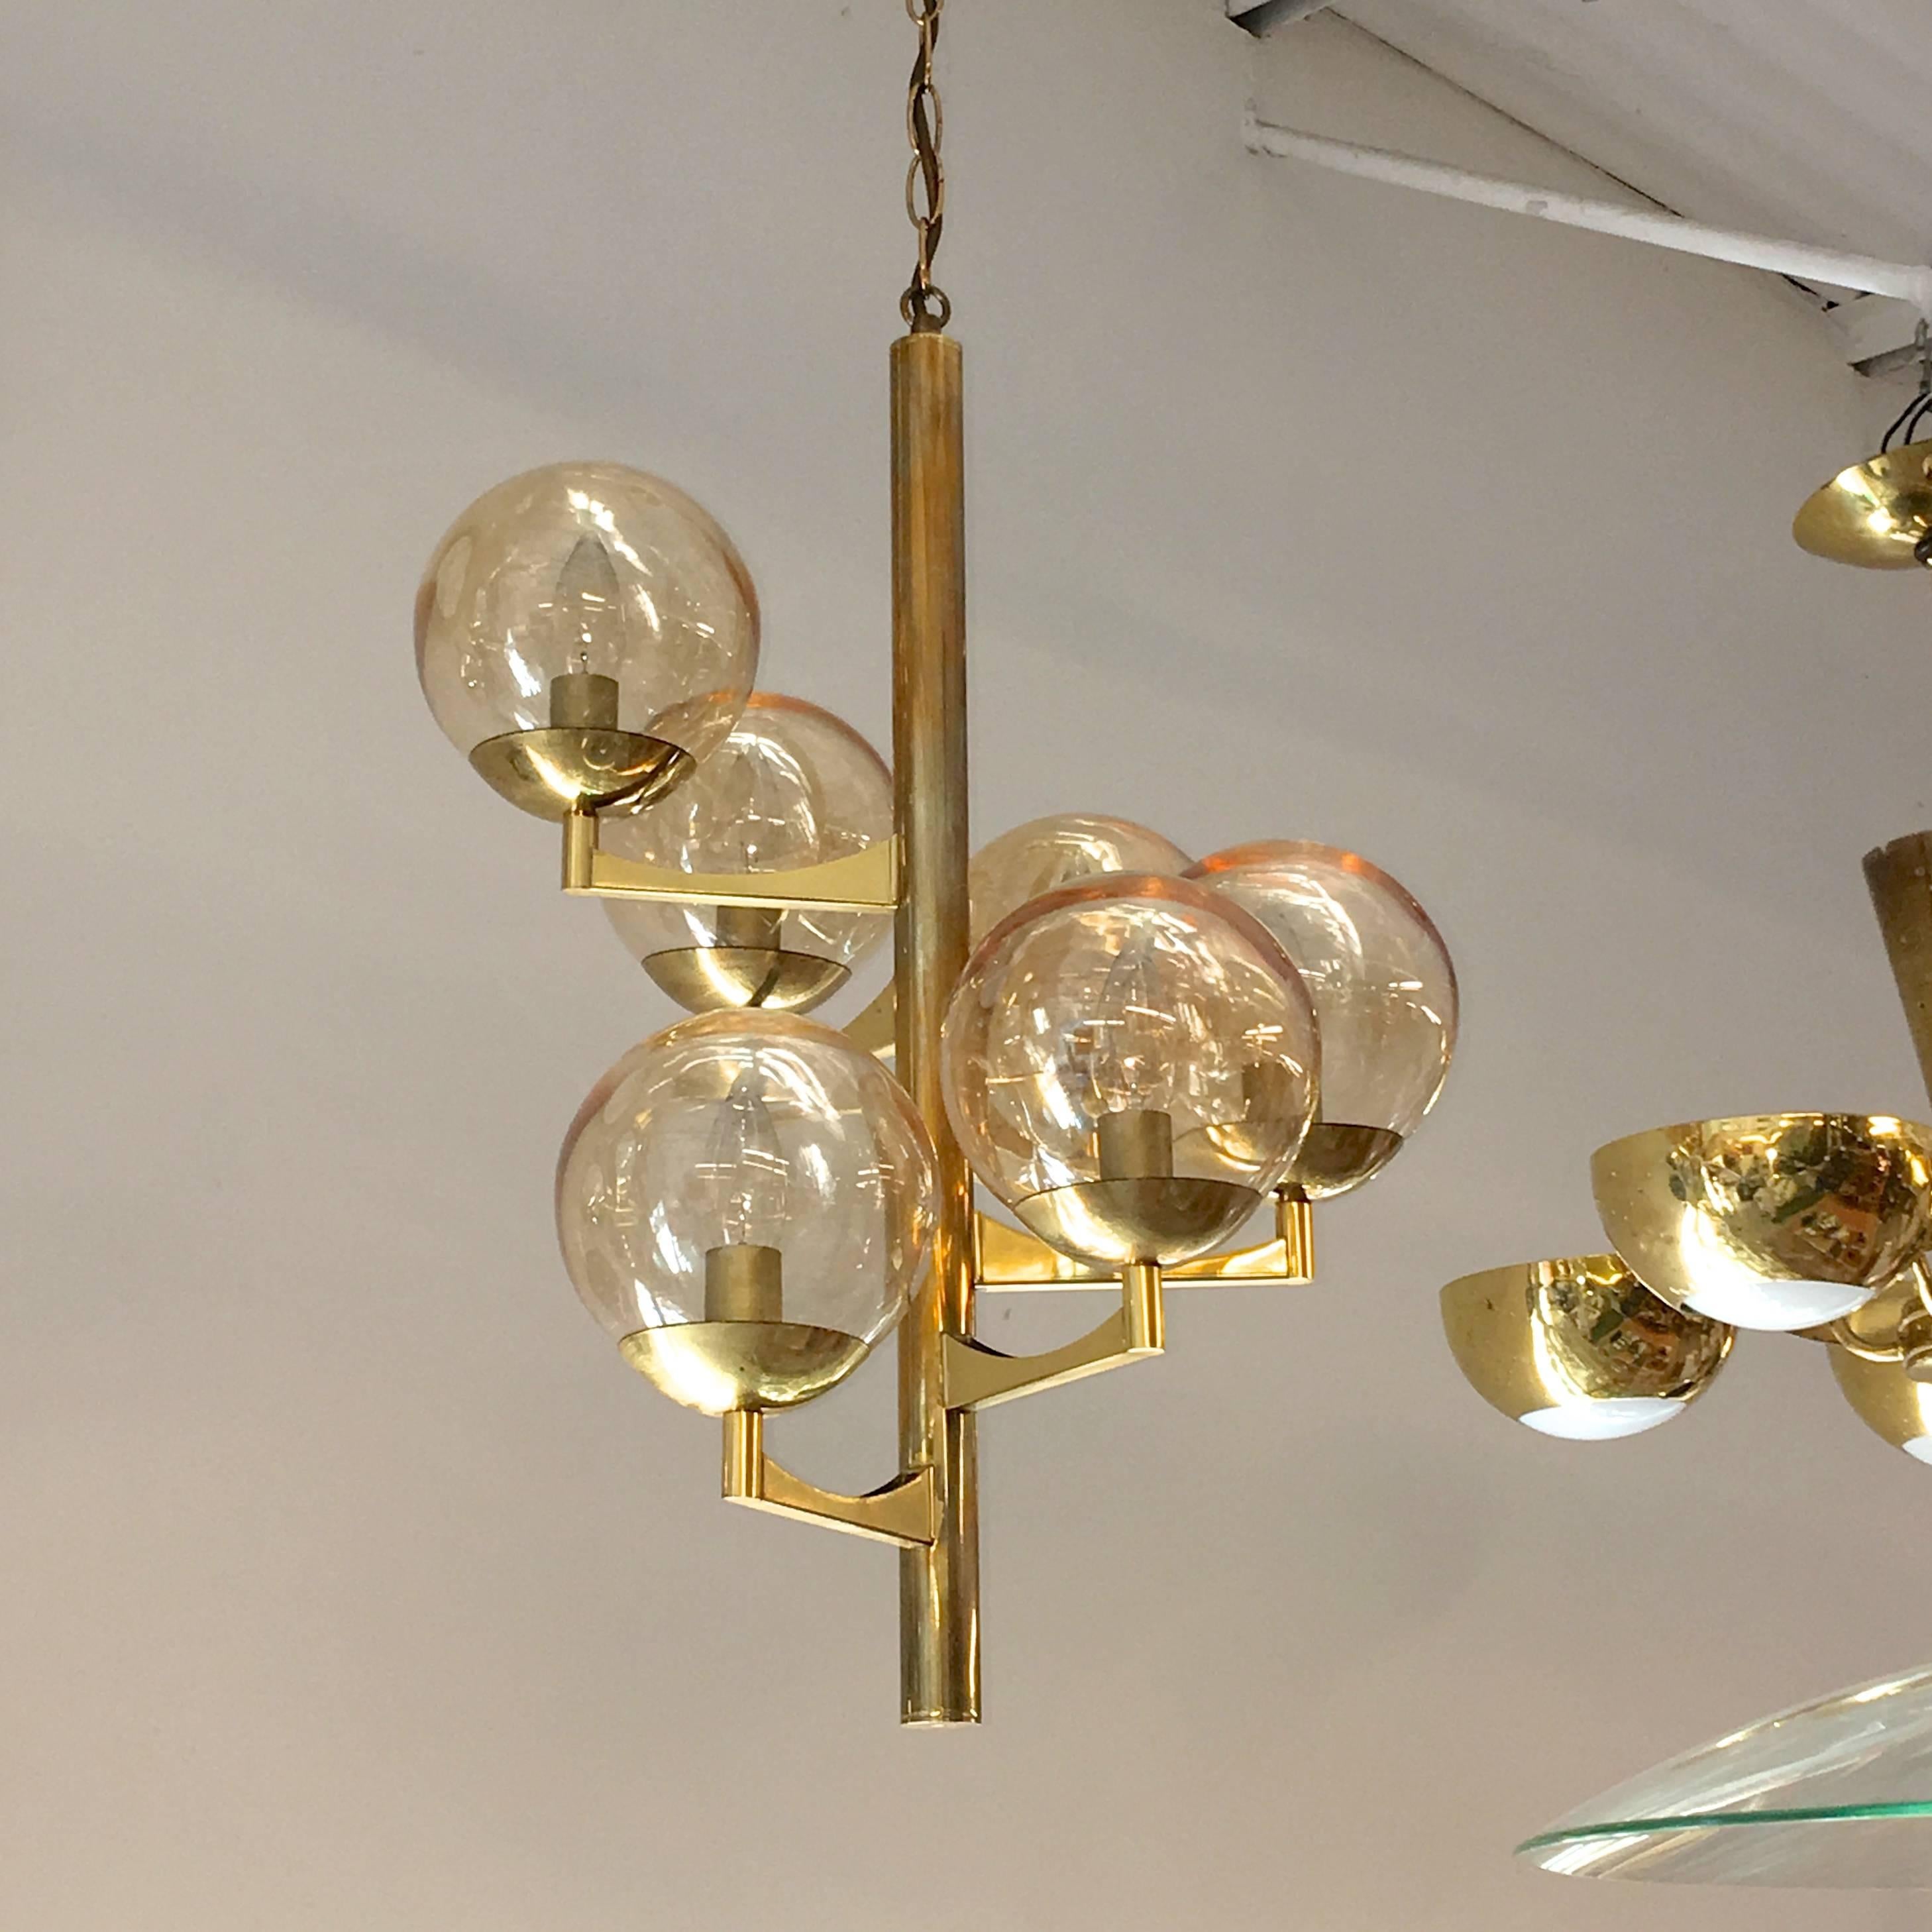 Gaetano Sciolari for Boulanger Belgium 1970s chandelier pendant with six amber glass balls on brass convex bobeches and brass supports arranged in a helix spiral around a central brass vertical stem suspended from brass chain.

Chain can be made